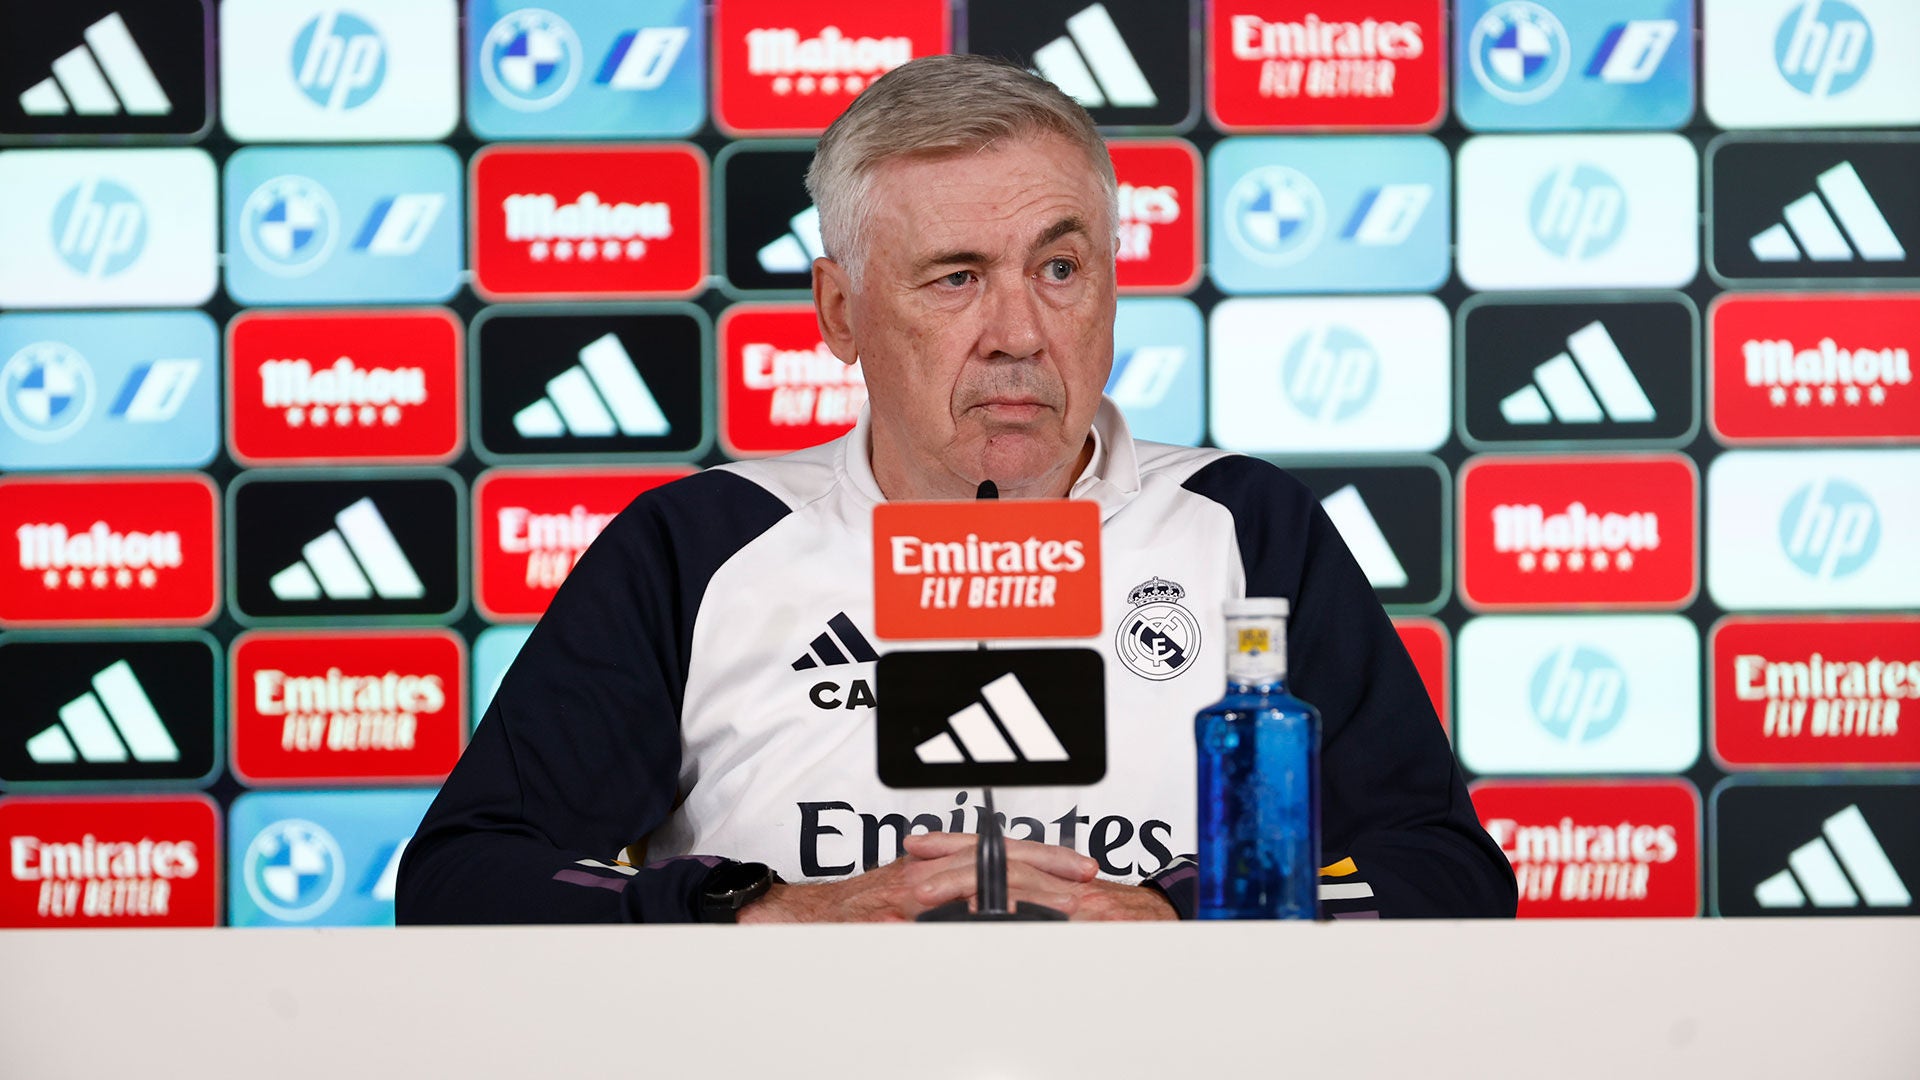 Ancelotti: "These are big moments in the season and we'll have to be at our best"